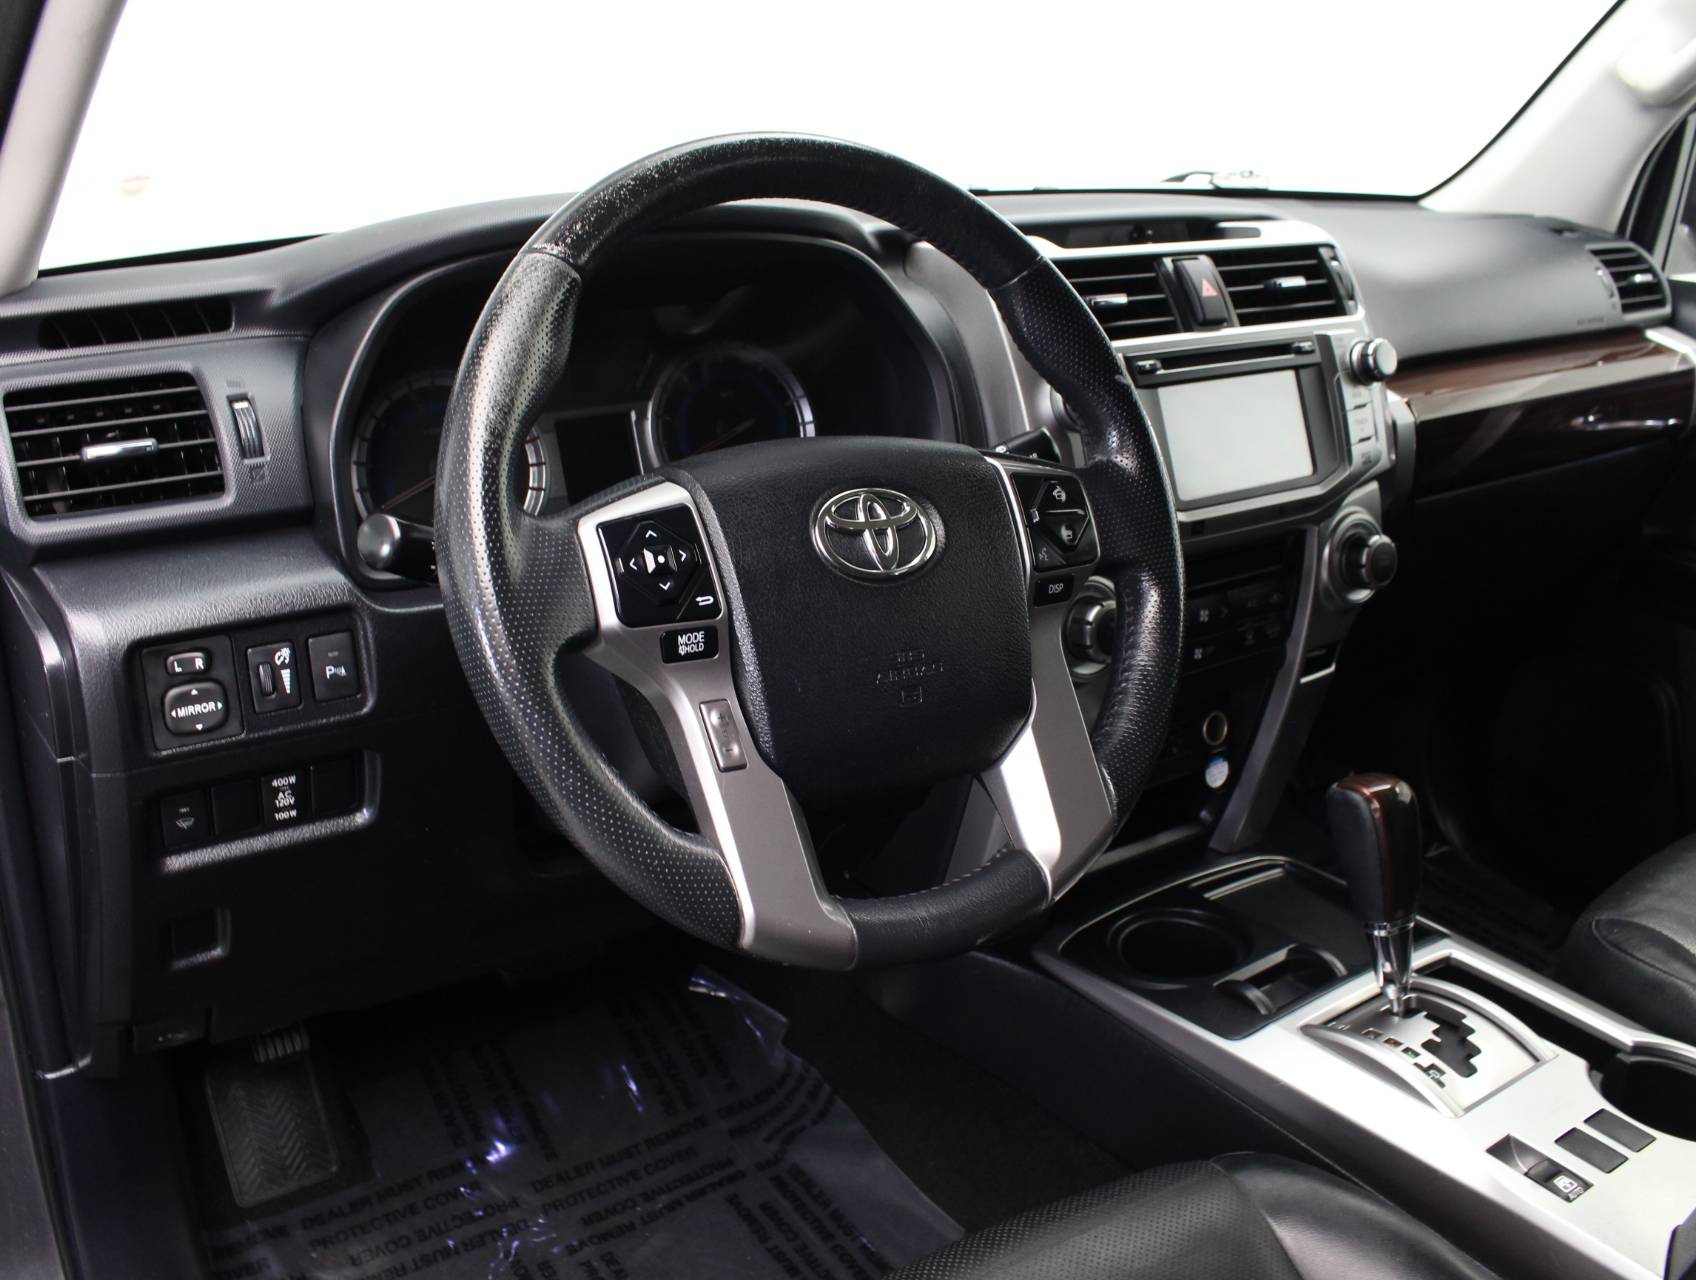 Florida Fine Cars - Used TOYOTA 4RUNNER 2014 WEST PALM LIMITED